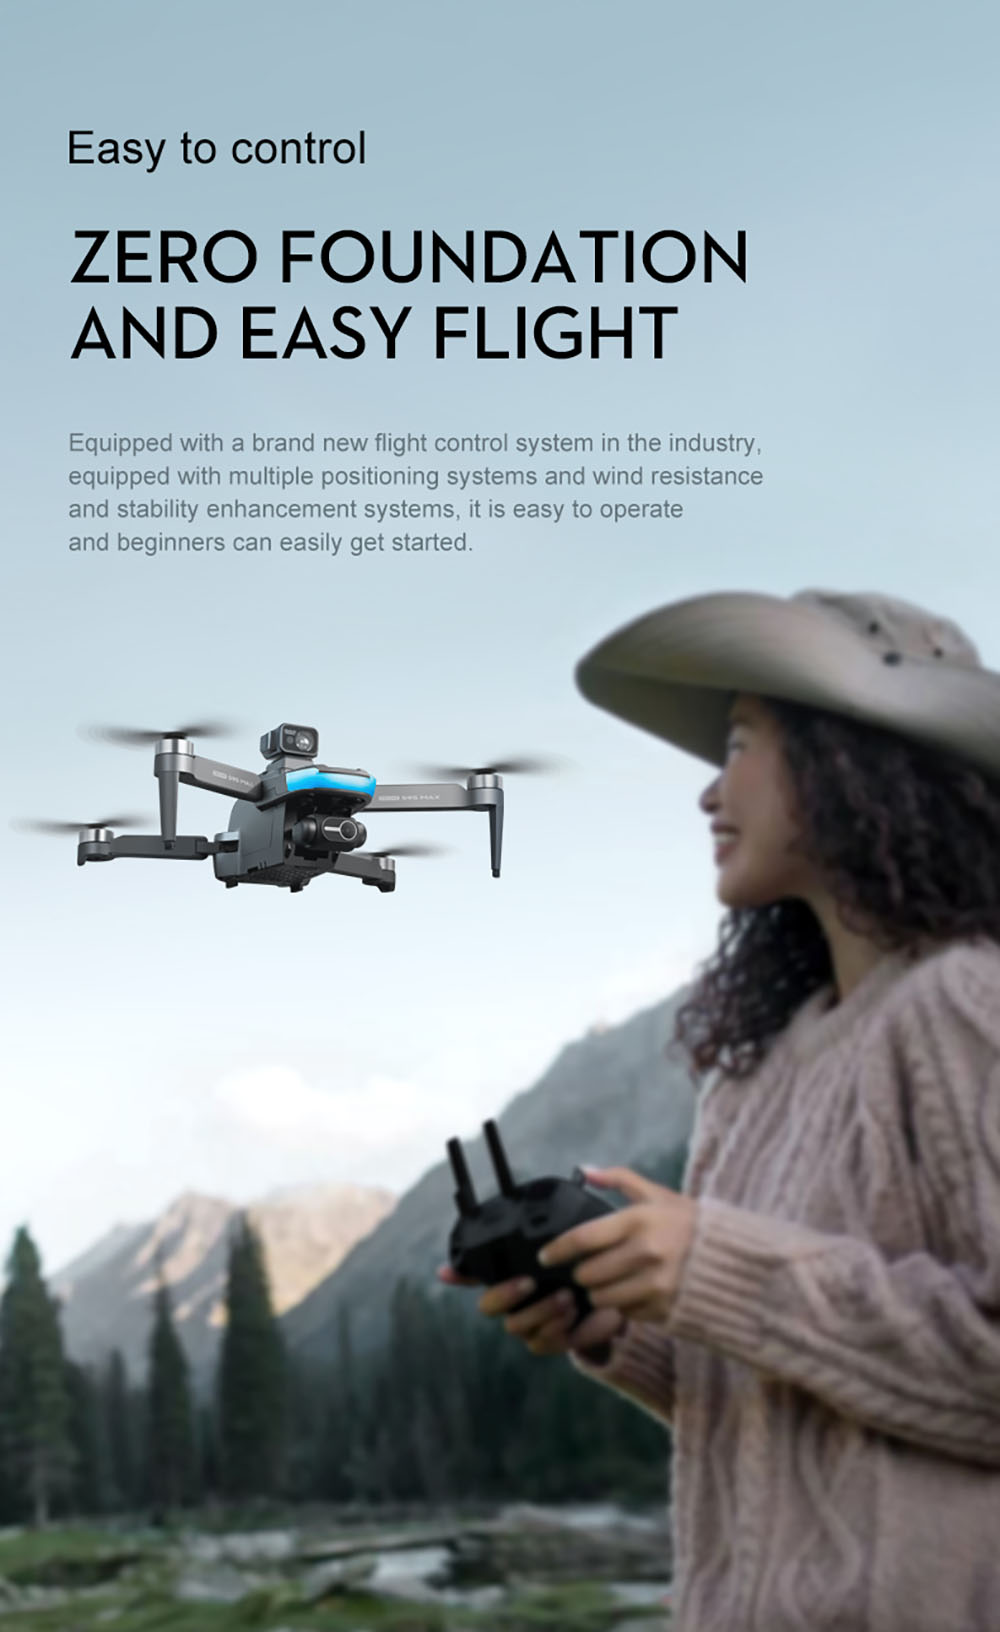 LSRC S9S GPS 5G WiFi FPV with 2.7K ESC HD Camera 2-Axis Mechanical Gimbal 360° Obstacle Avoidance Brushless 218g Foldable RC Drone Quadcopter RTF